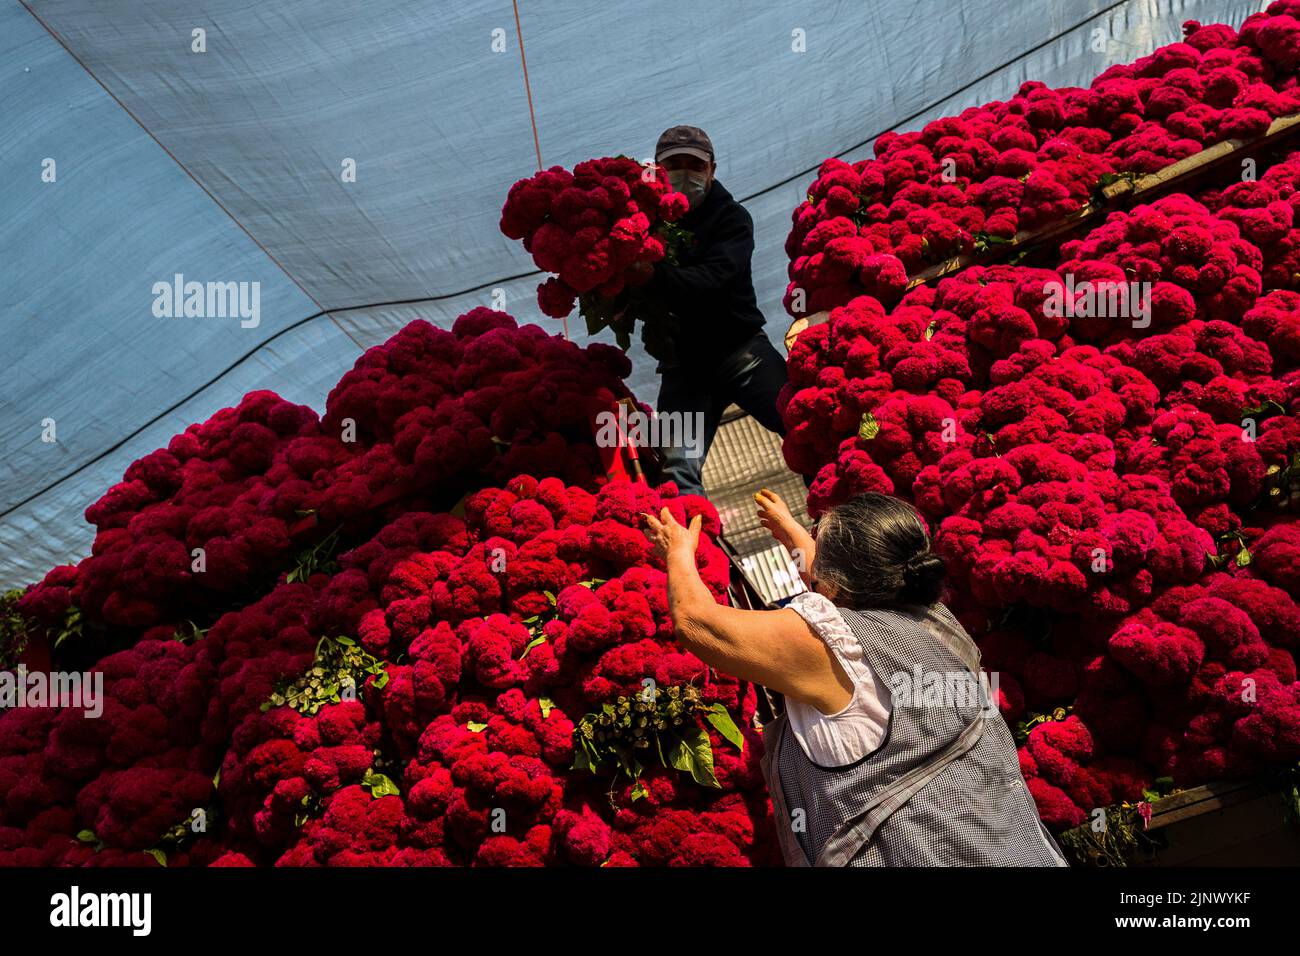 A Mexican farmer unloads bunches of marigold flowers for the Day of the Dead celebrations in the market in Mexico City, Mexico. Stock Photo